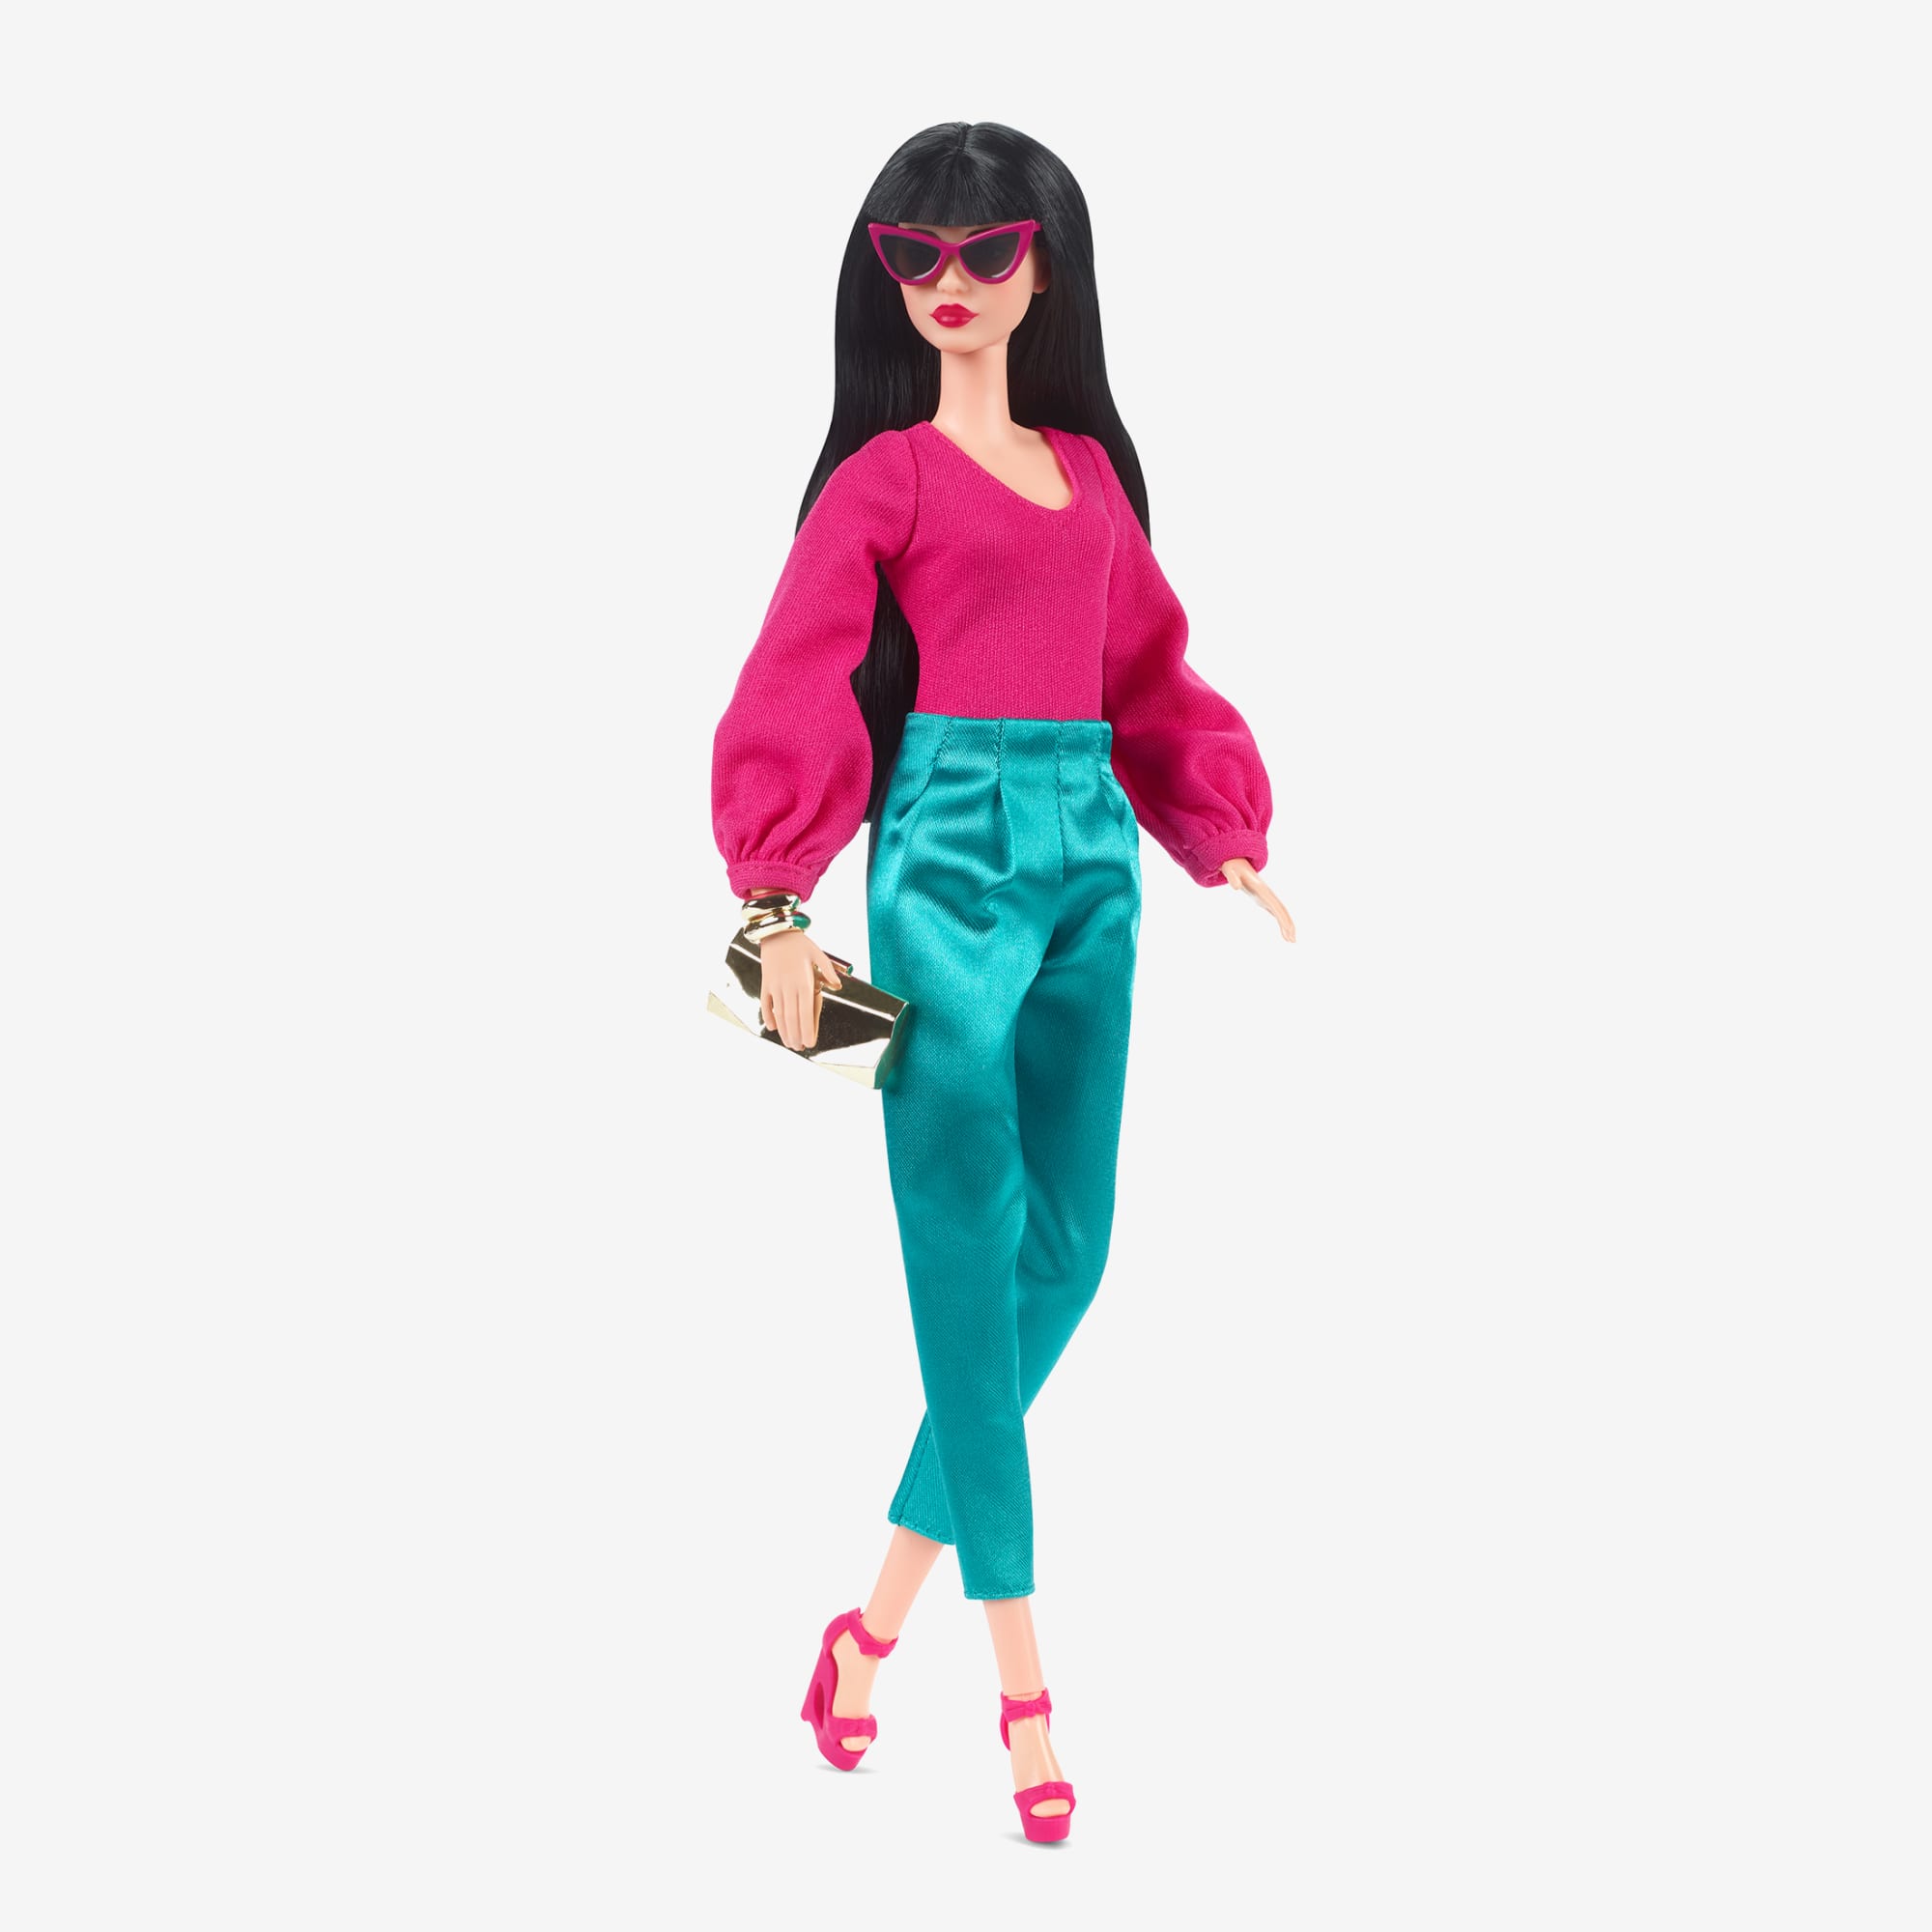 Barbie Signature Looks Doll 2021, Barbie Fashion Collection